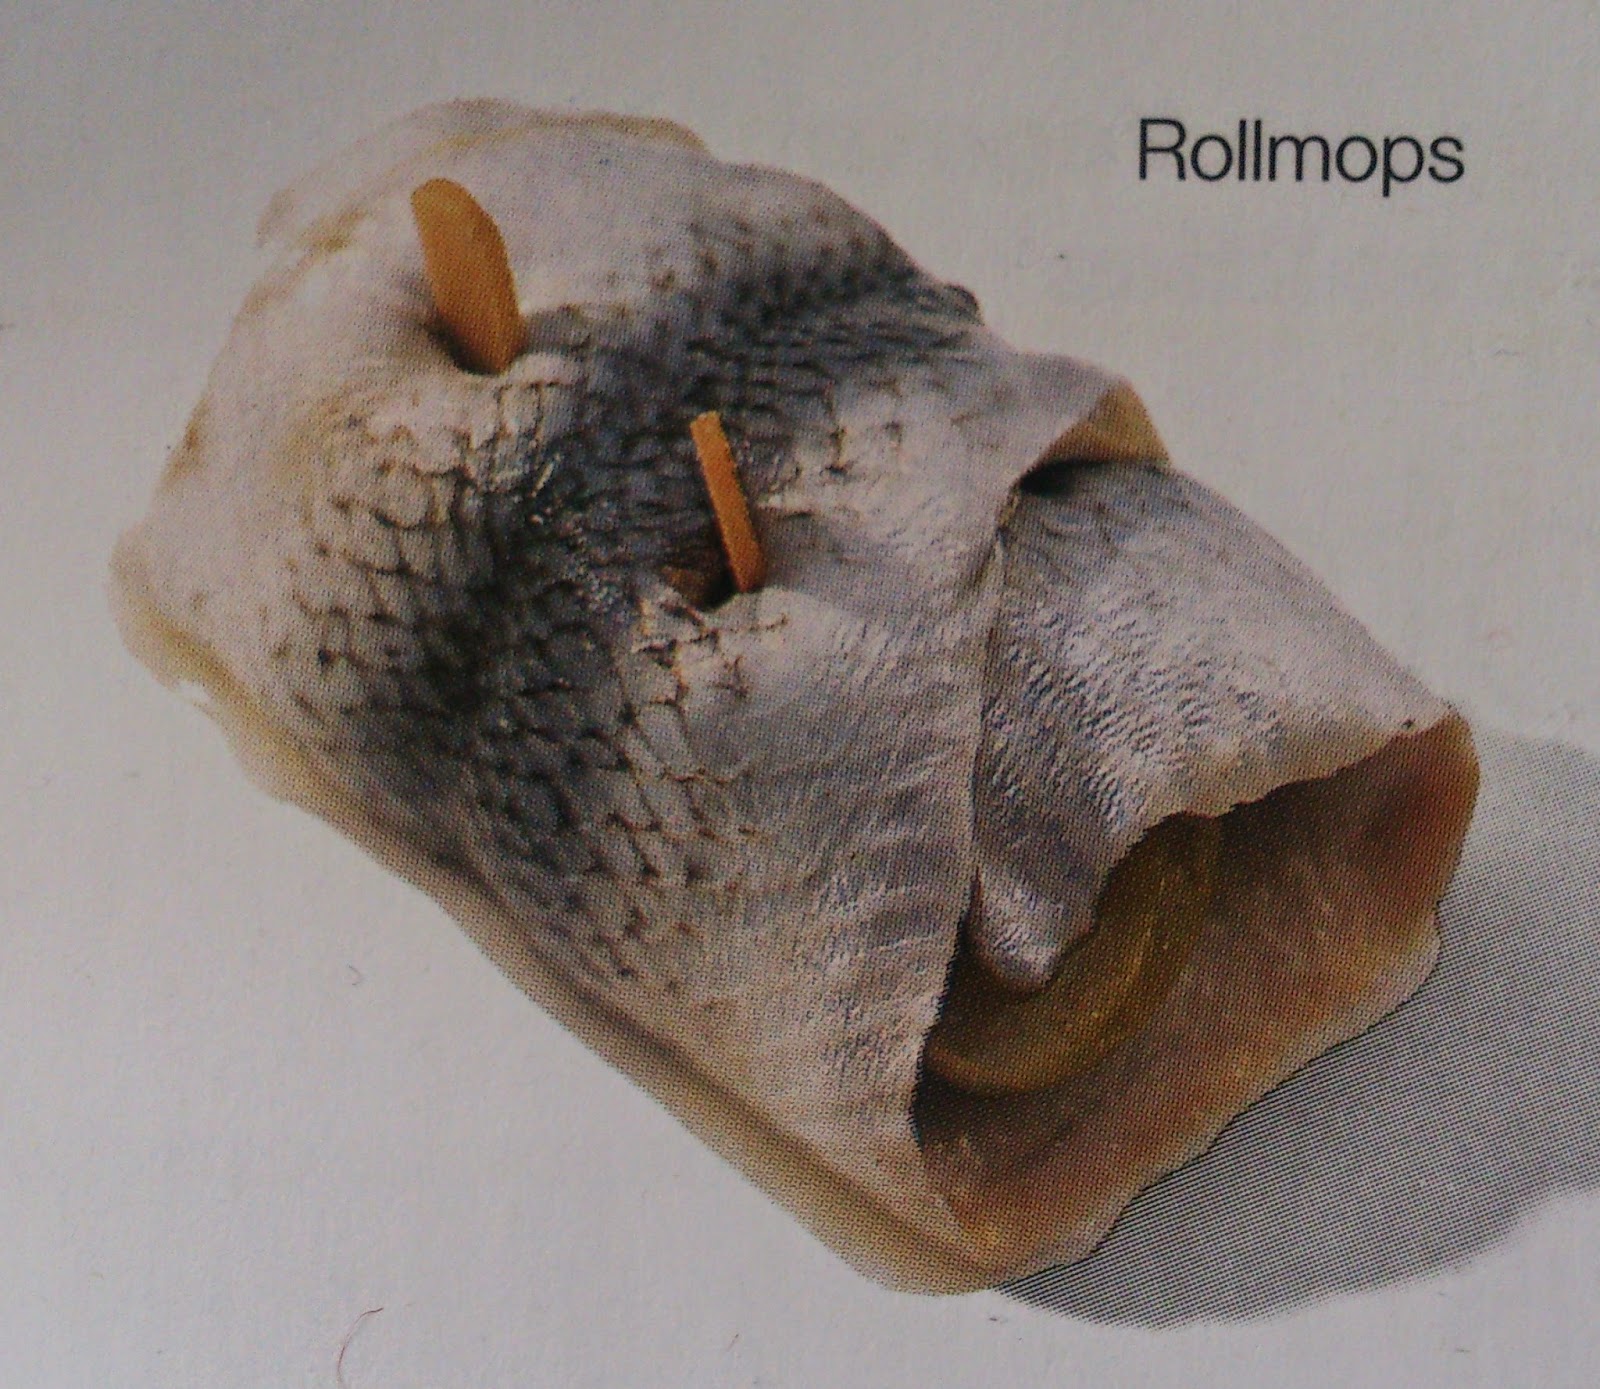 National Kitchen Recipes: Rollmops